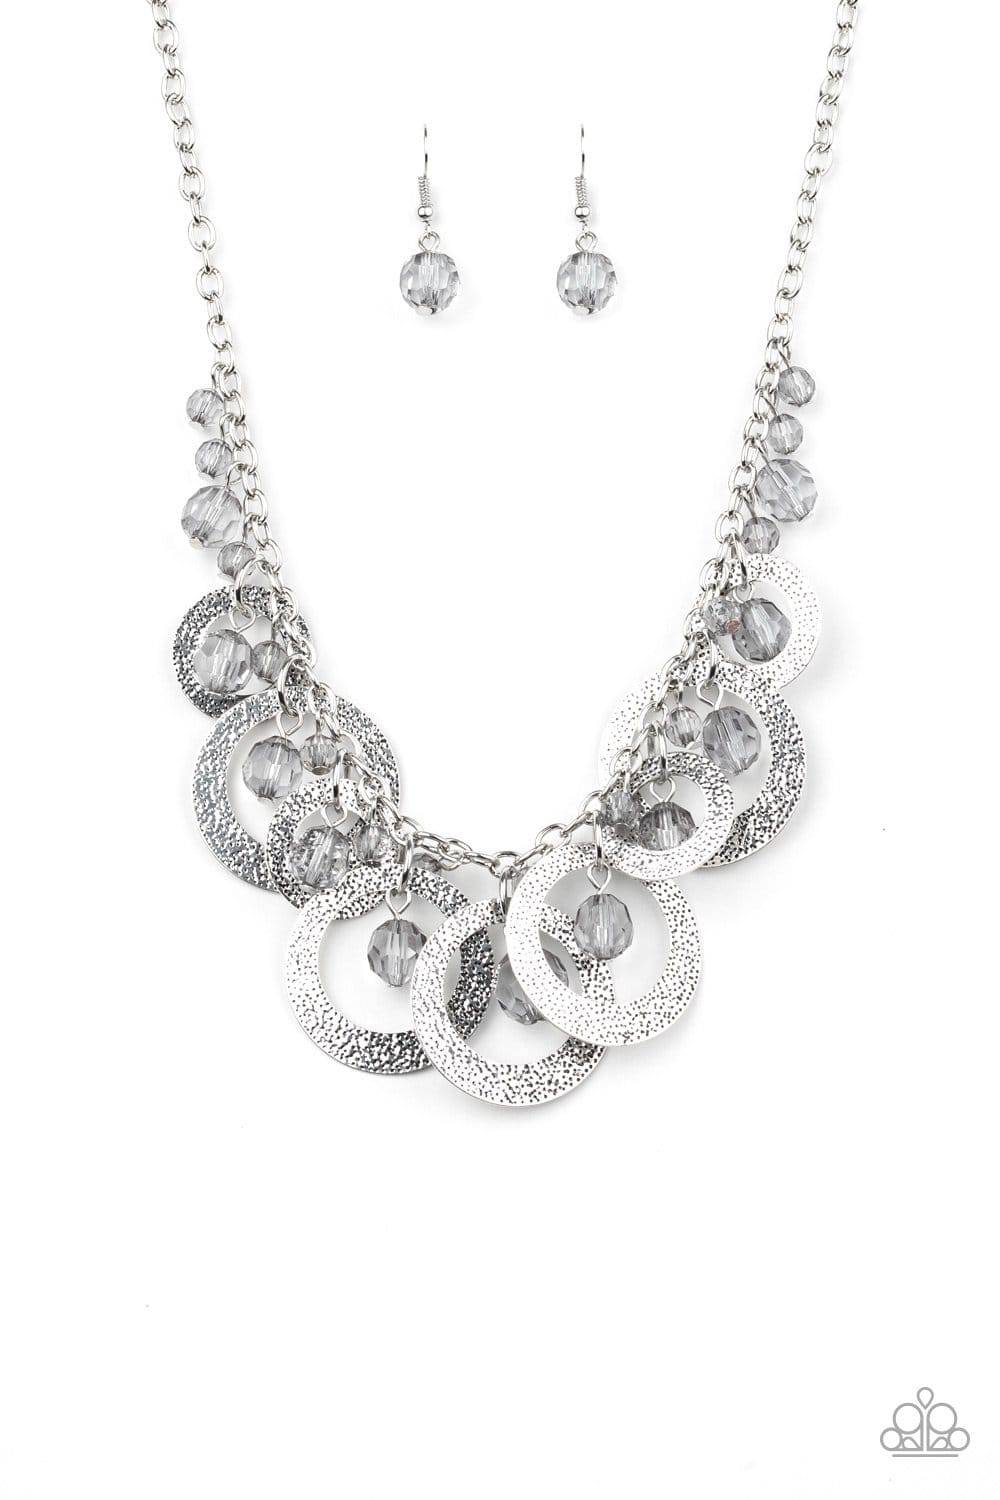 A75 - Turn It Up - Necklace by Paparazzi Accessories on Fancy5Fashion.com